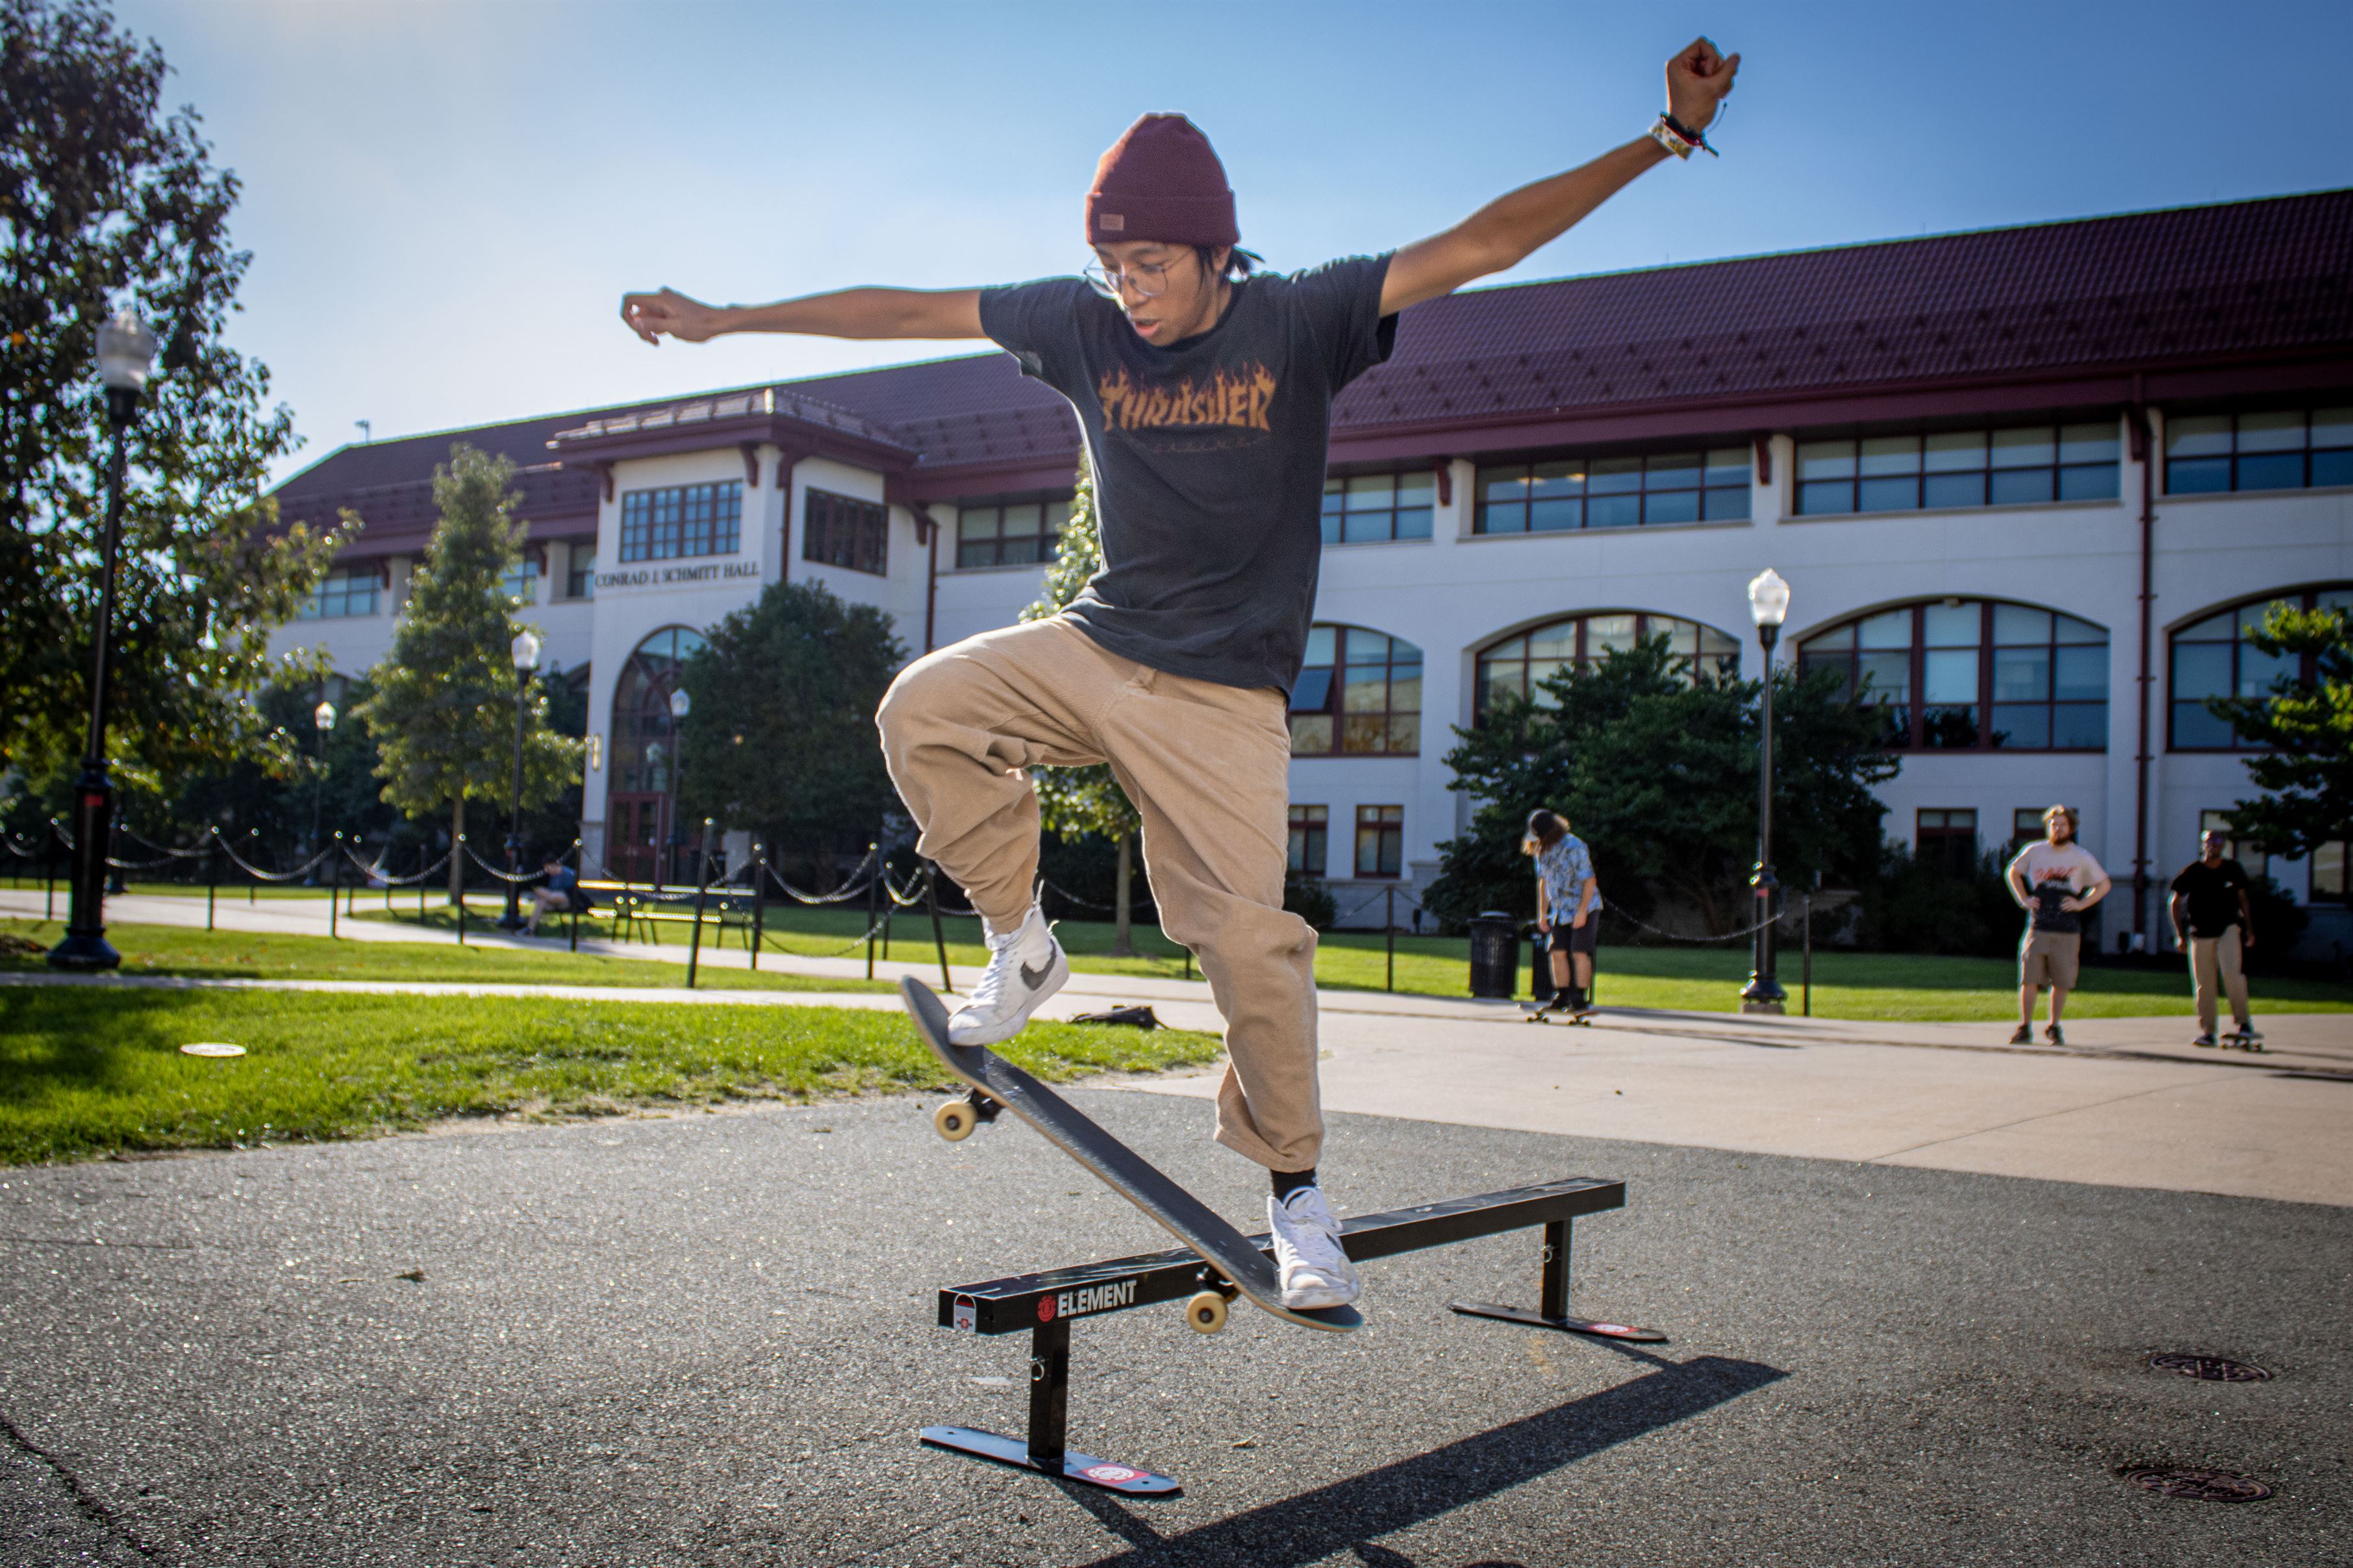 A skateboarder attempting a trick on the rail. 
Dani Mazariegos | The Montclarion